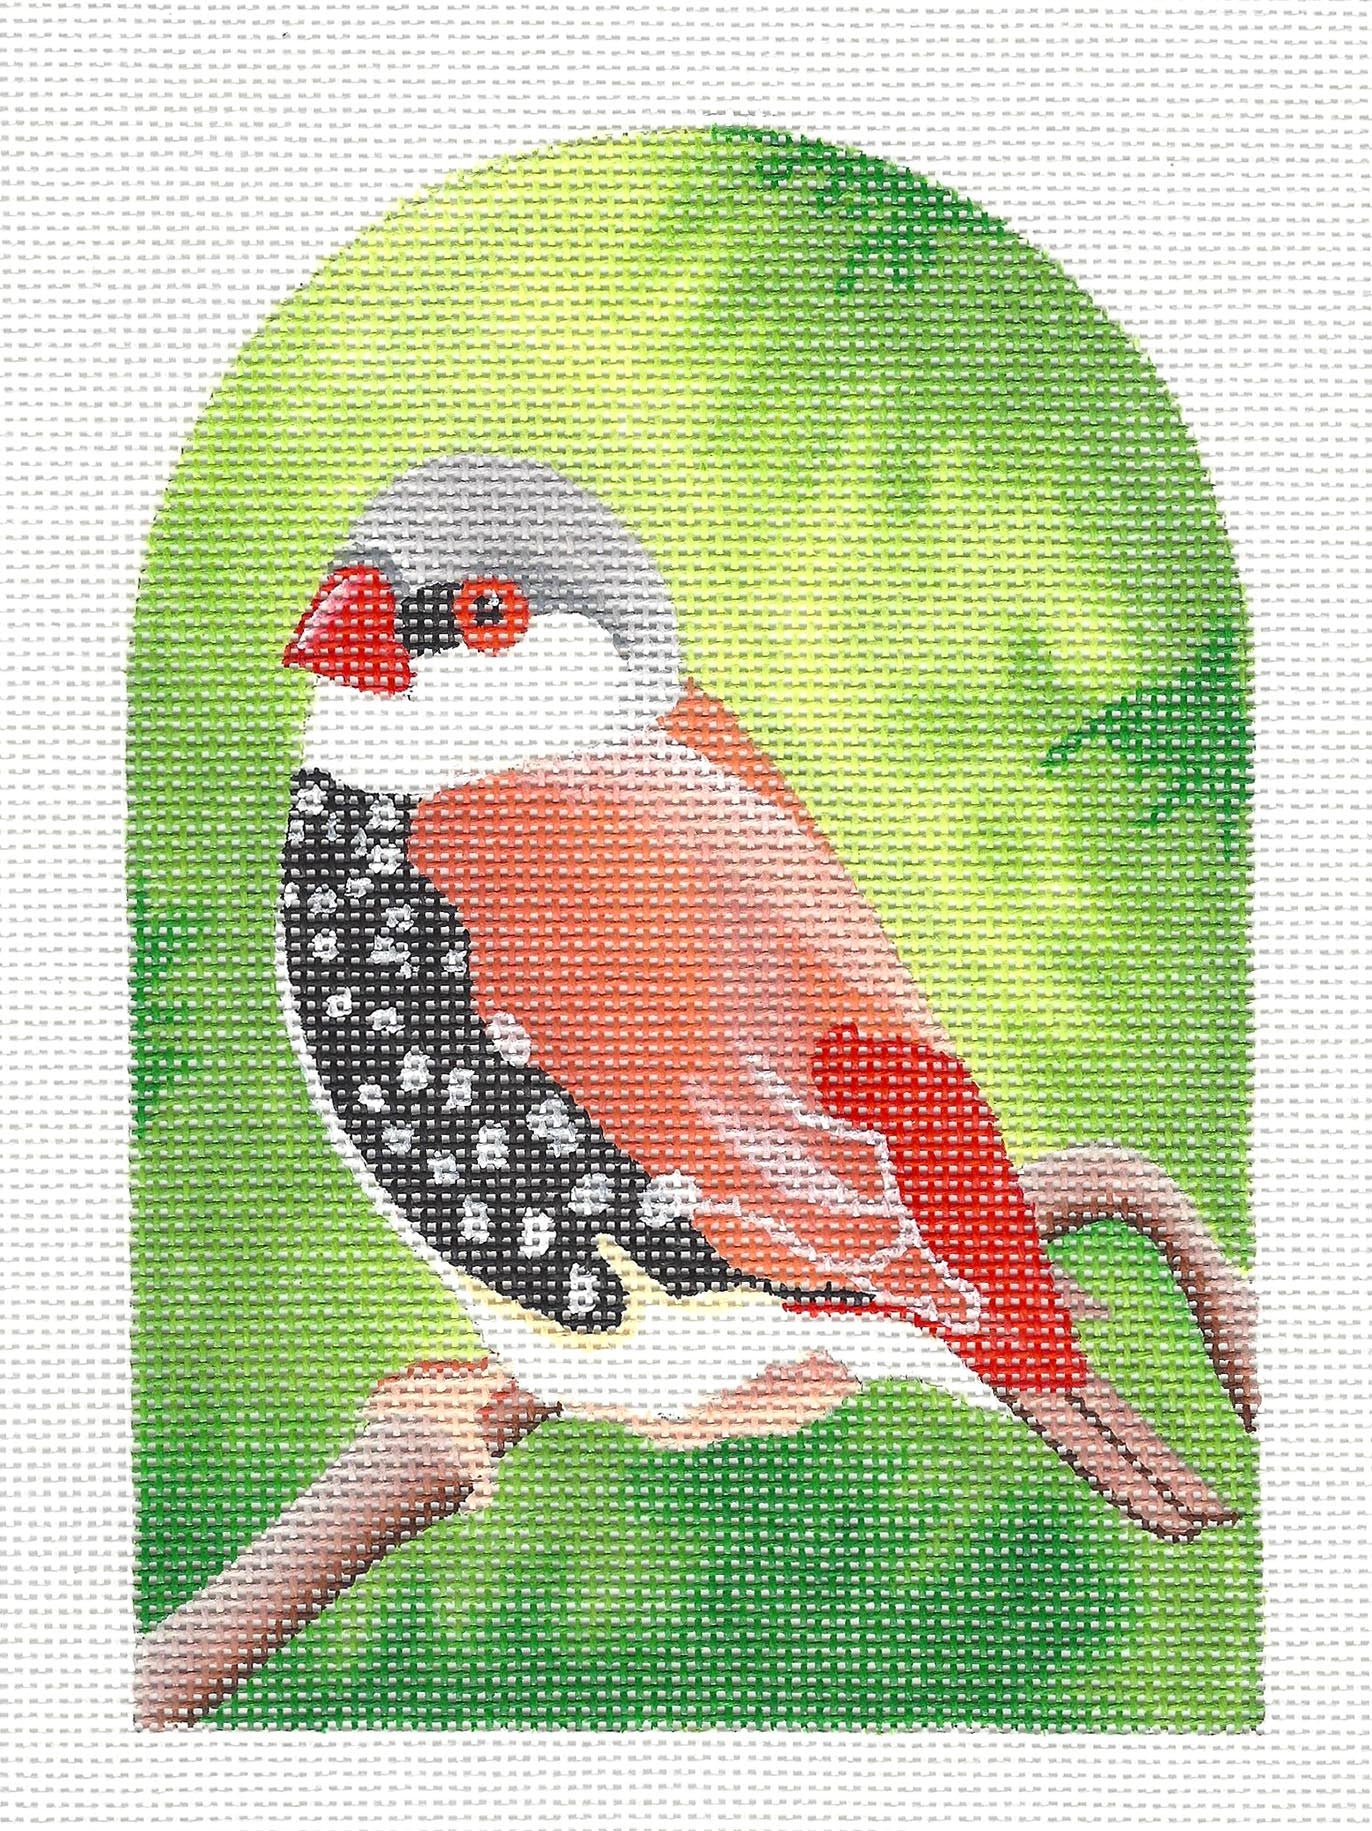 Bird Canvas ~ Red and Black Spotted Finch handpainted Needlepoint Canvas by Raymond Crawford